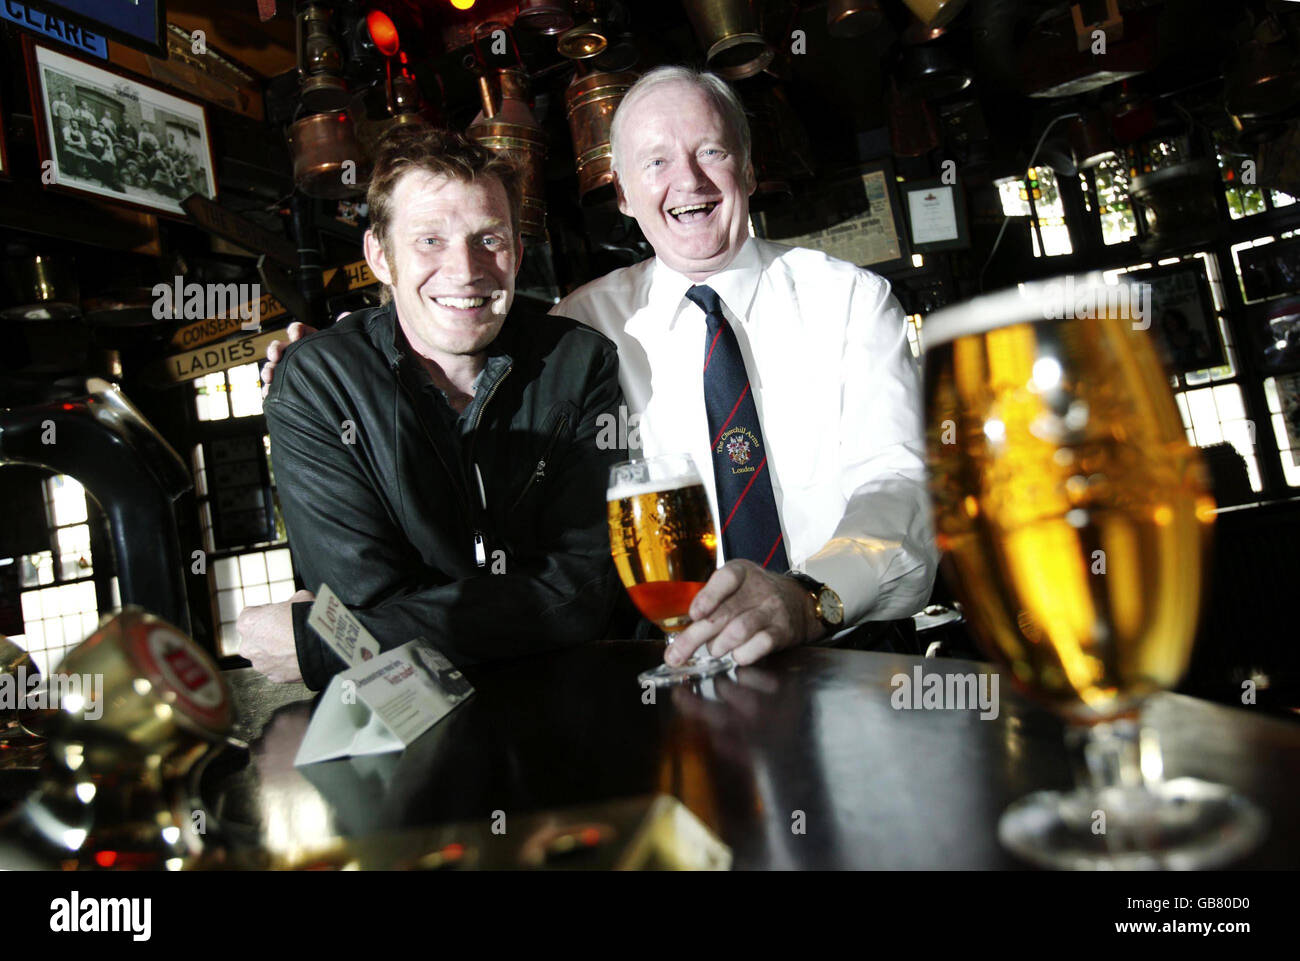 Landlord Gerry O'Brien (right), winner of the Stella Artois Love Your Local campaign and actor Jason Flemyng inside The Churchill Arms on Kensington Church Street, London. Stock Photo